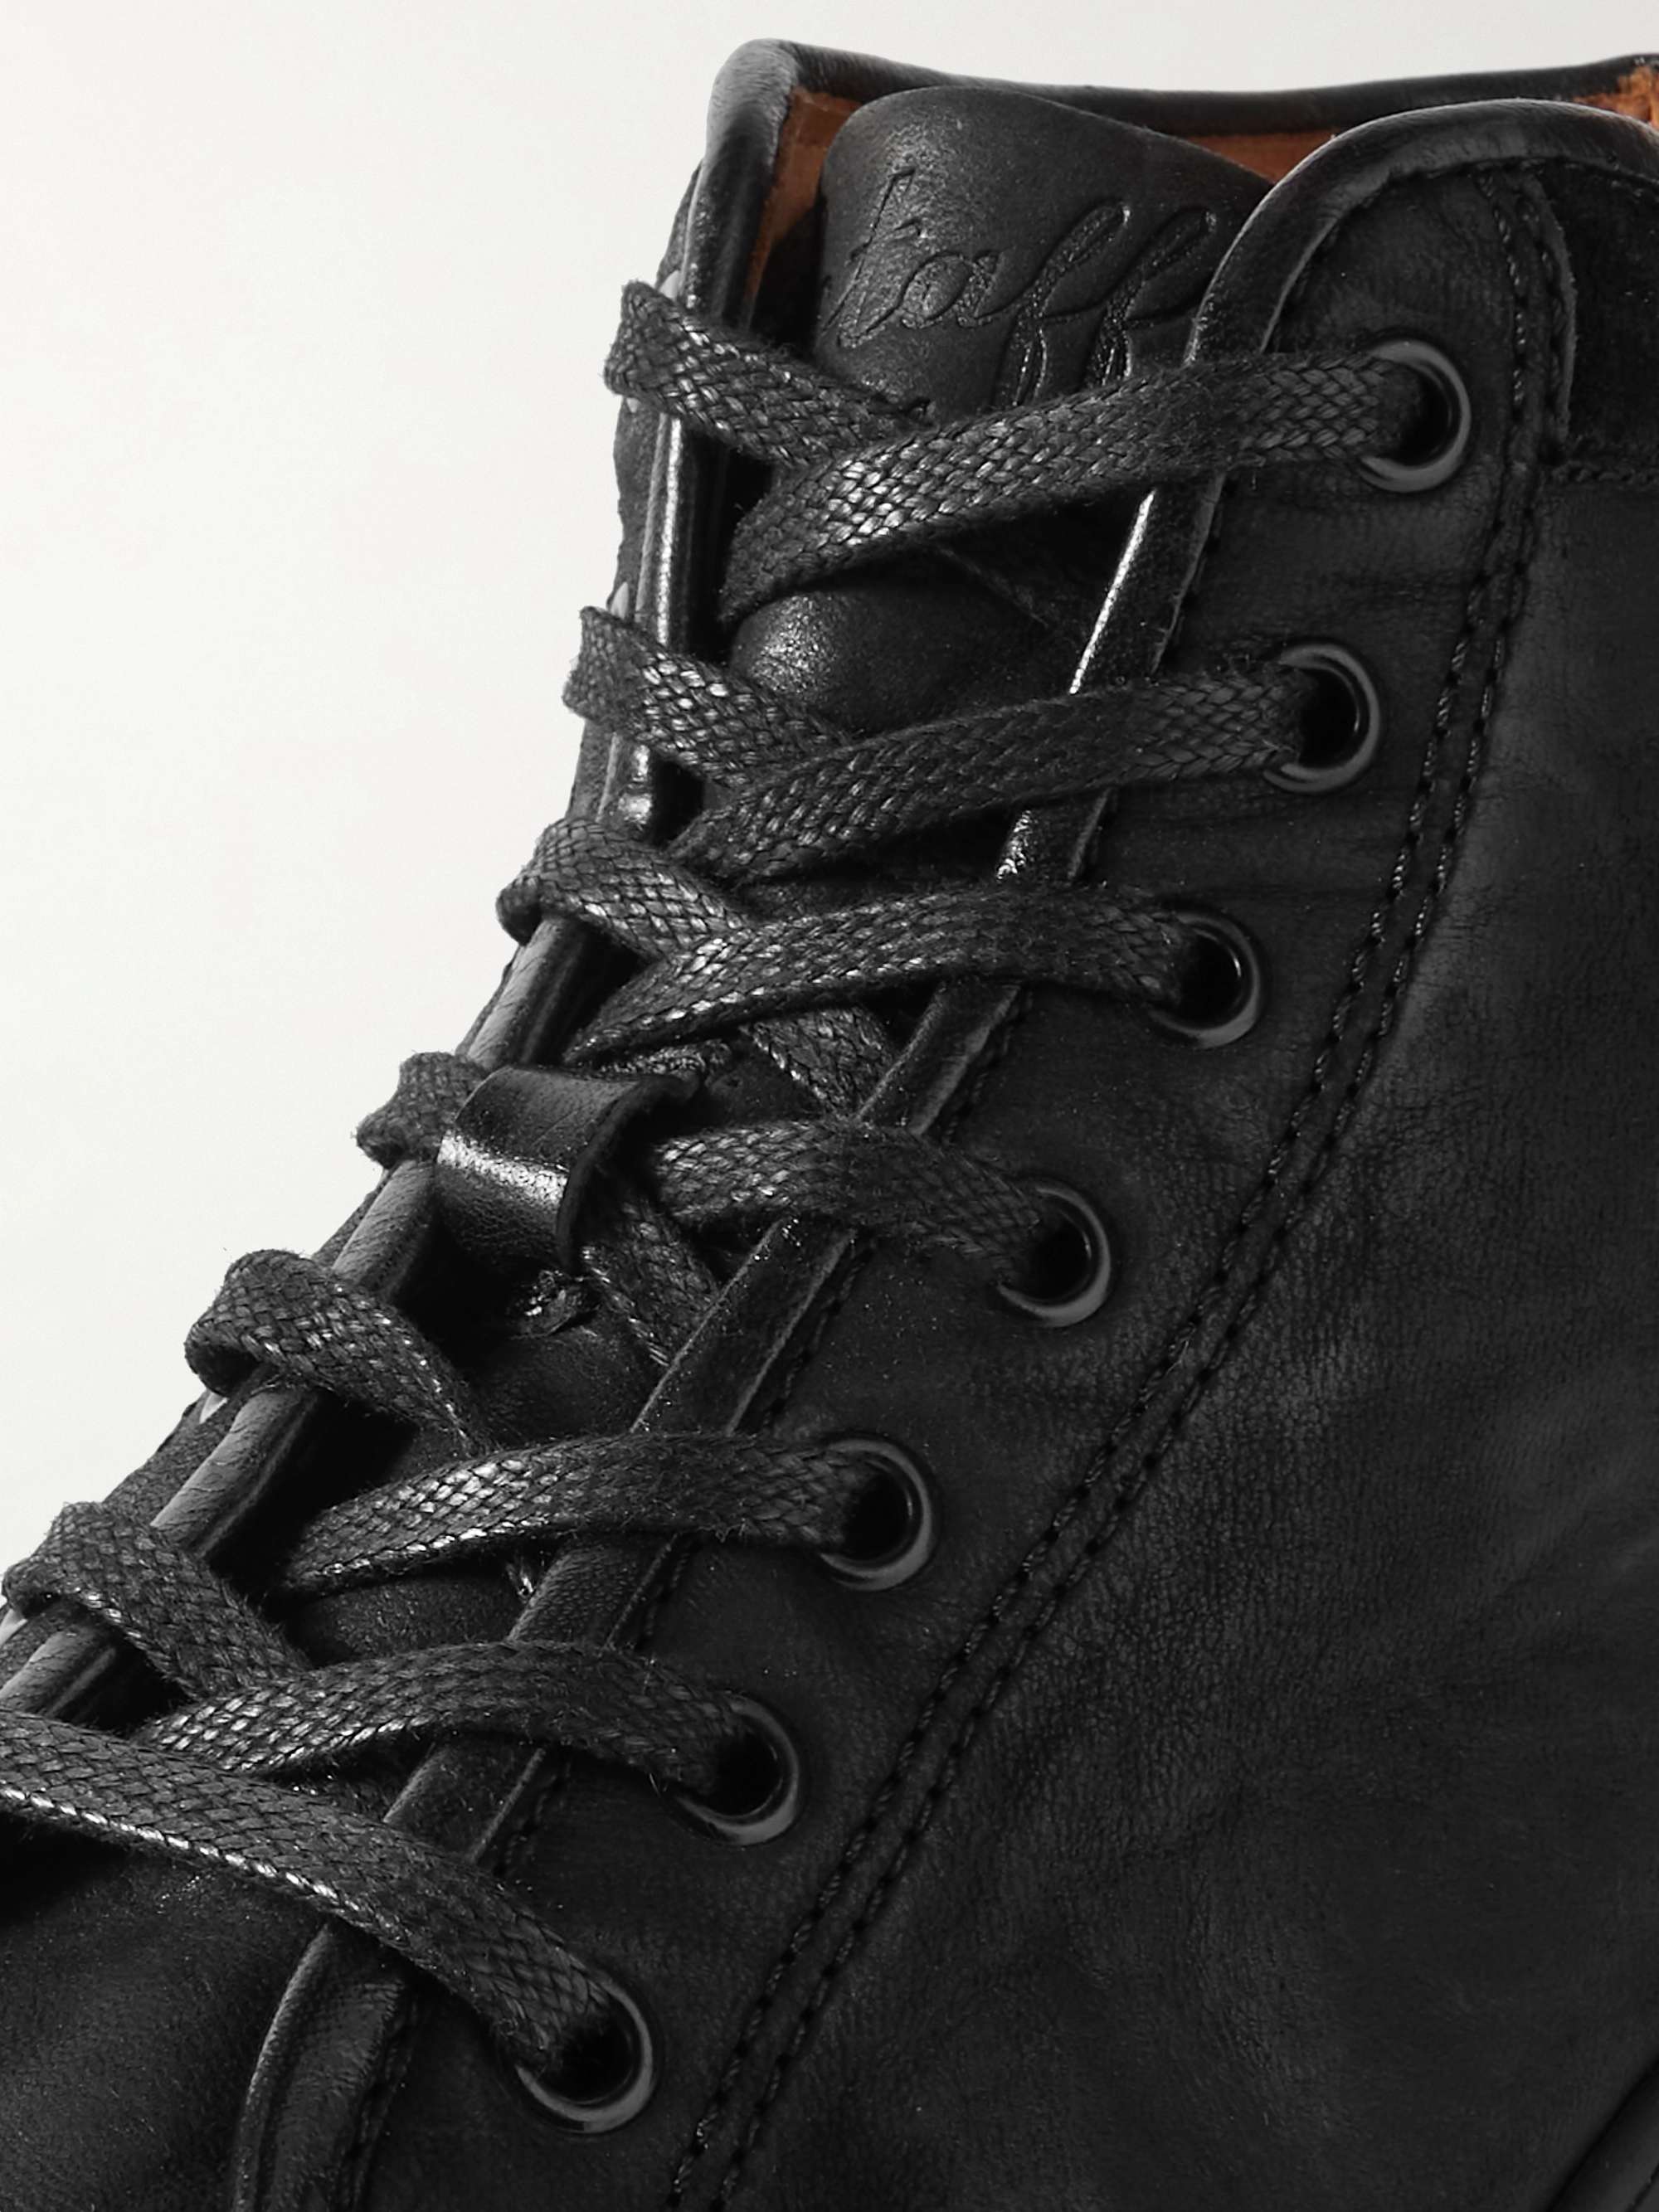 BELSTAFF Rally Suede-Trimmed Leather High-Top Sneakers